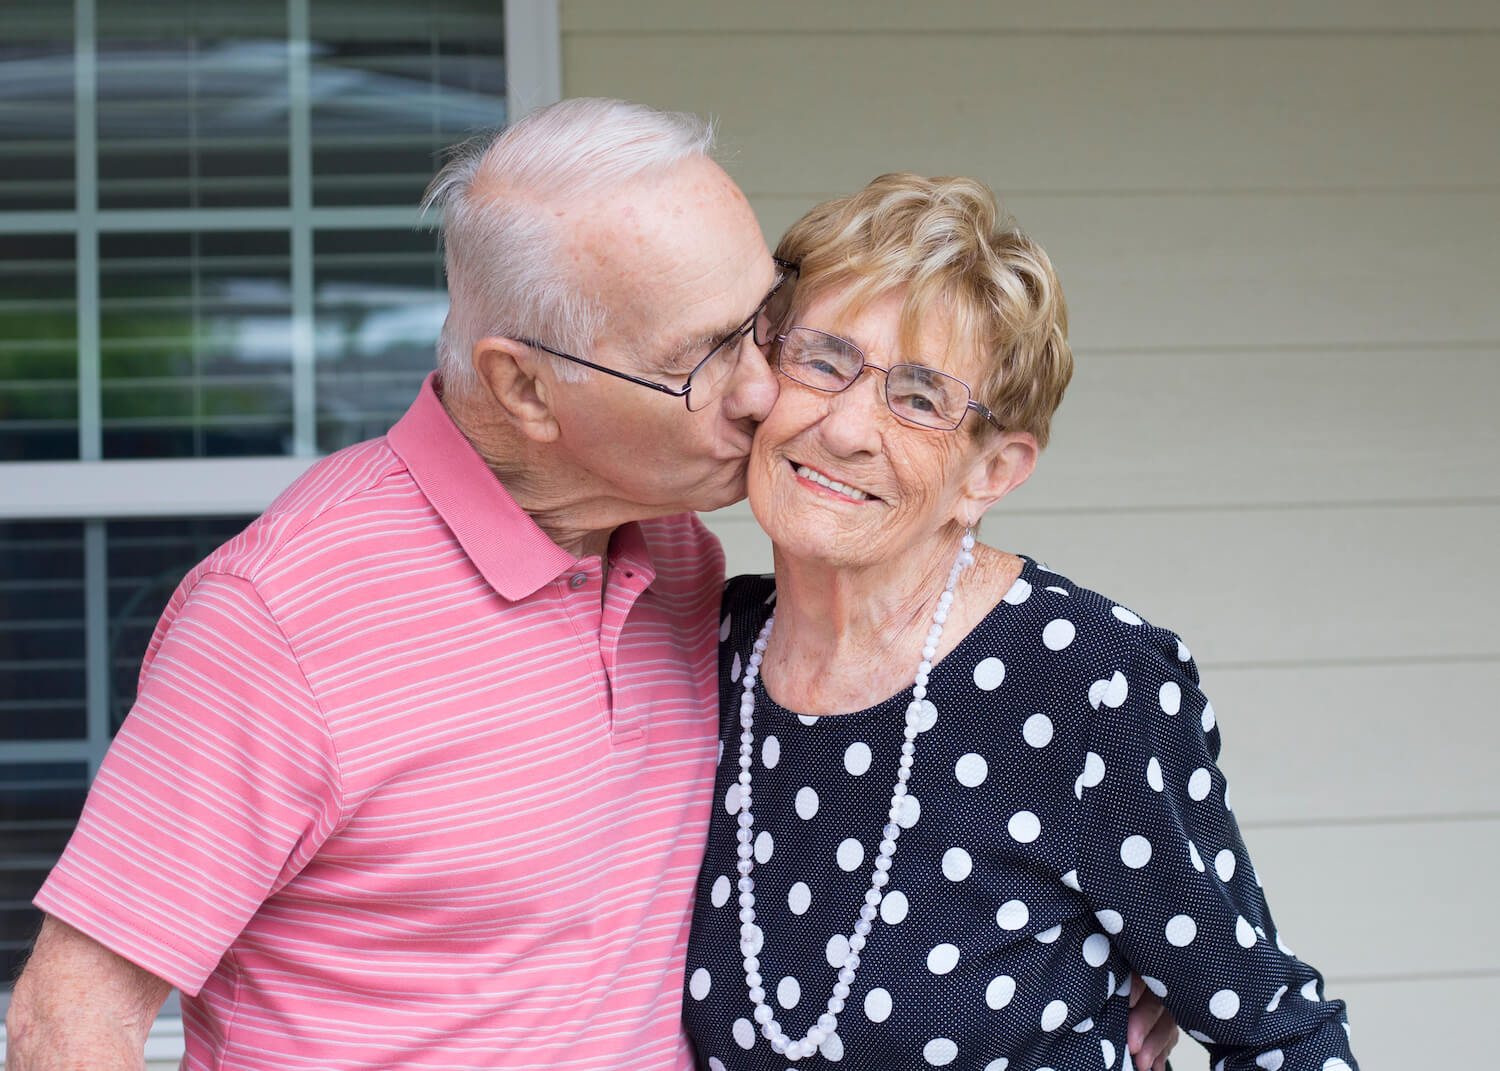 Residents kissing on a porch